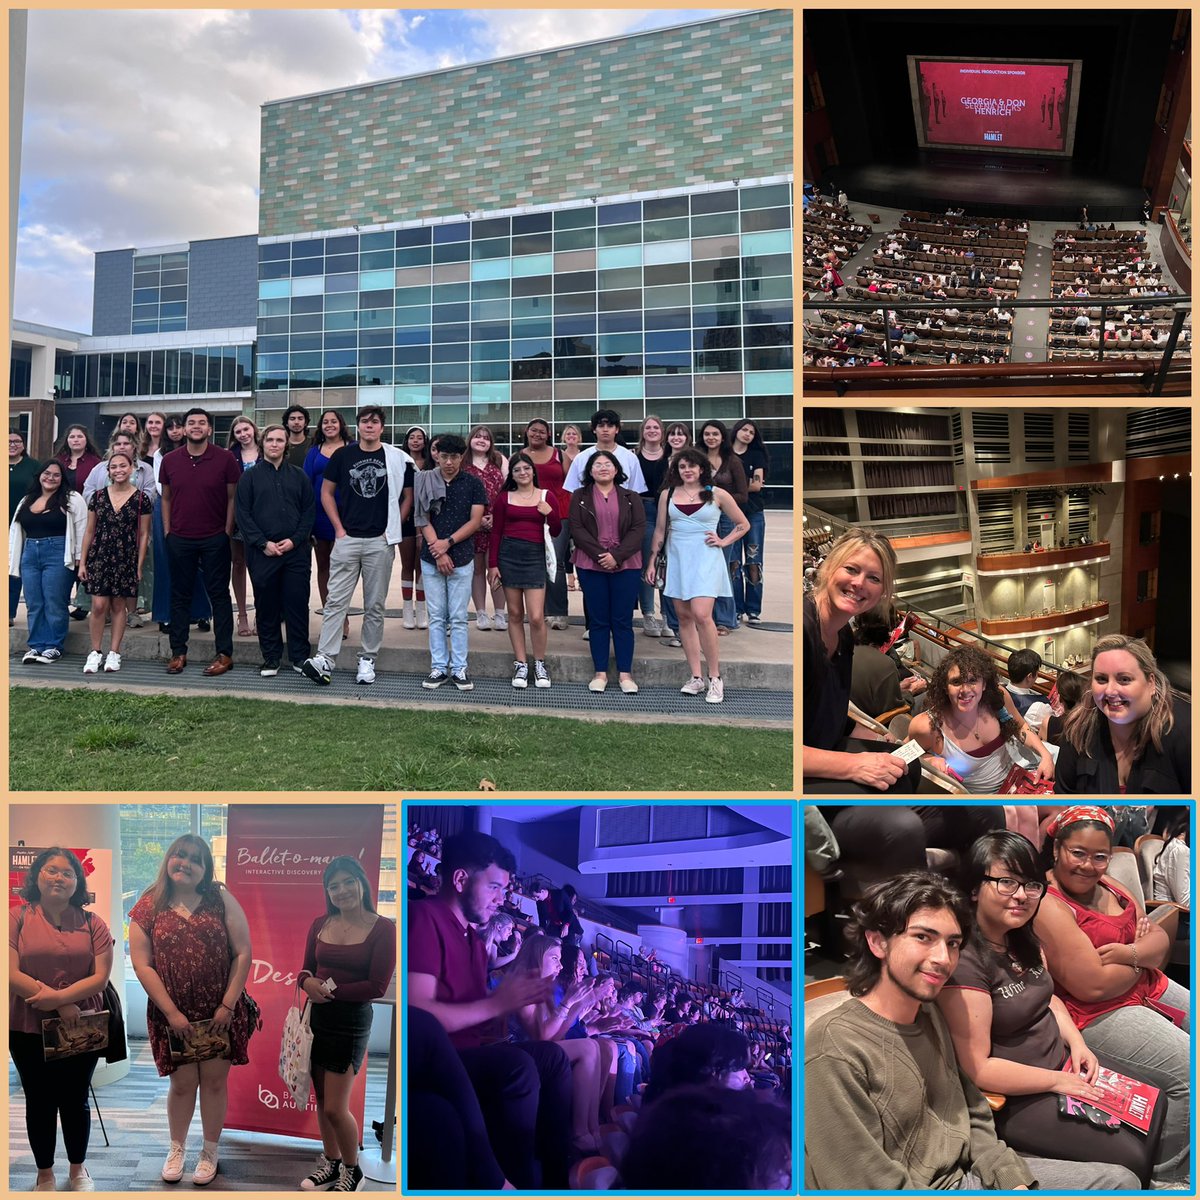 What an amazing day!🎉
🐂UT College Visit on Game Day!
🍽️Dinner at Fogo De Chao
🩰 Hamlet by Austin Ballet
We celebrated the arts 🎭  and enjoyed a day of culture, music, and GEAR UP! 💜⚙️
#GEARUPWorks